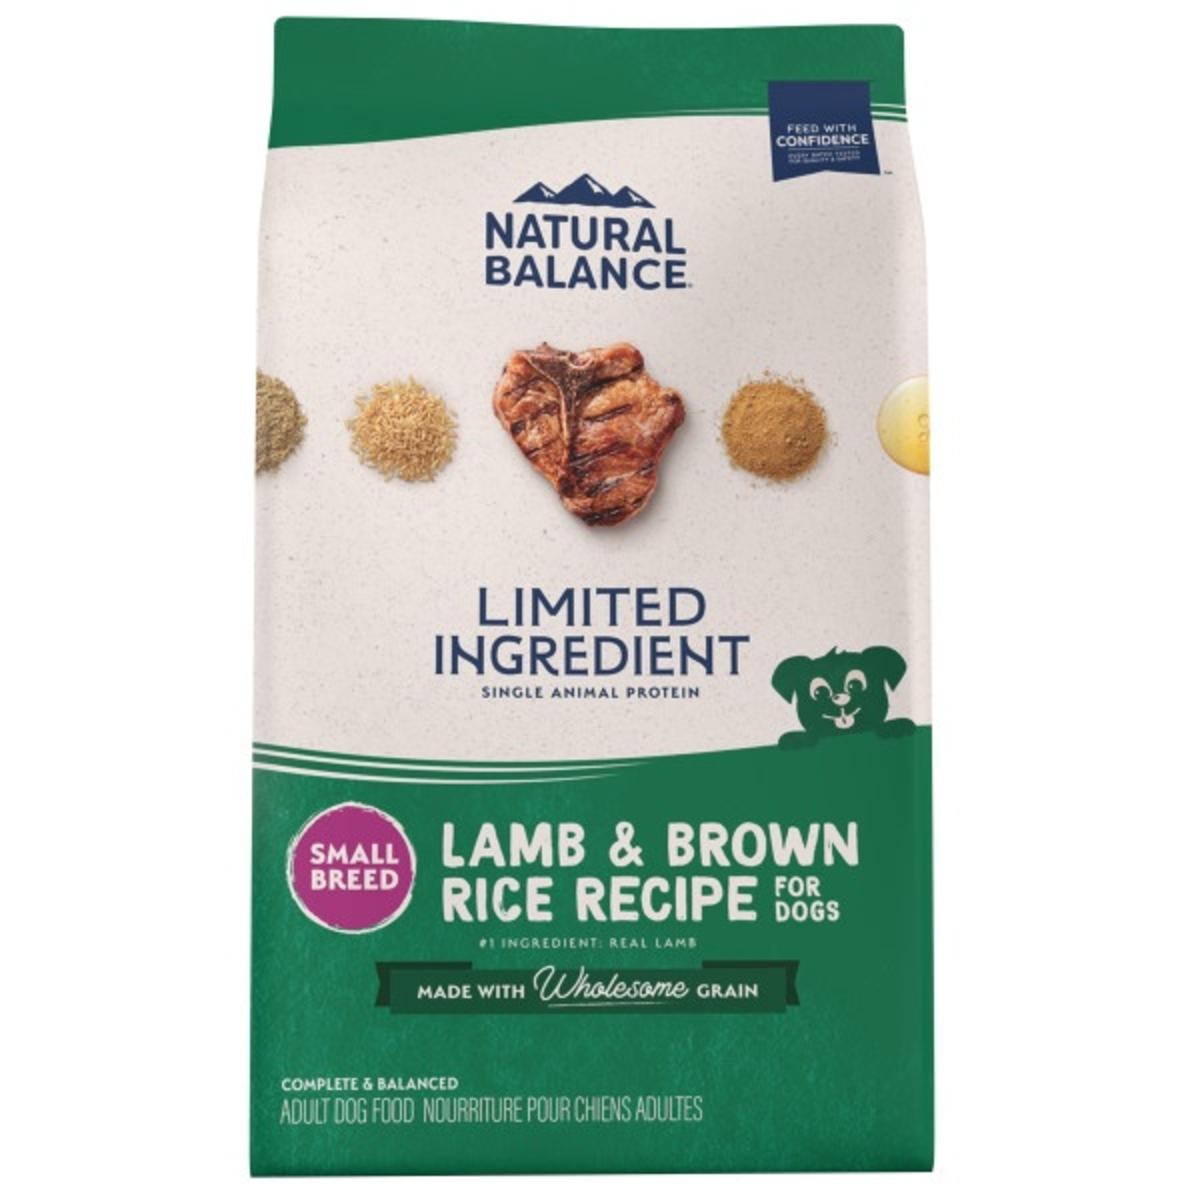 Natural Balance® Limited Ingredient Lamb & Brown Rice Small Breed Recipe